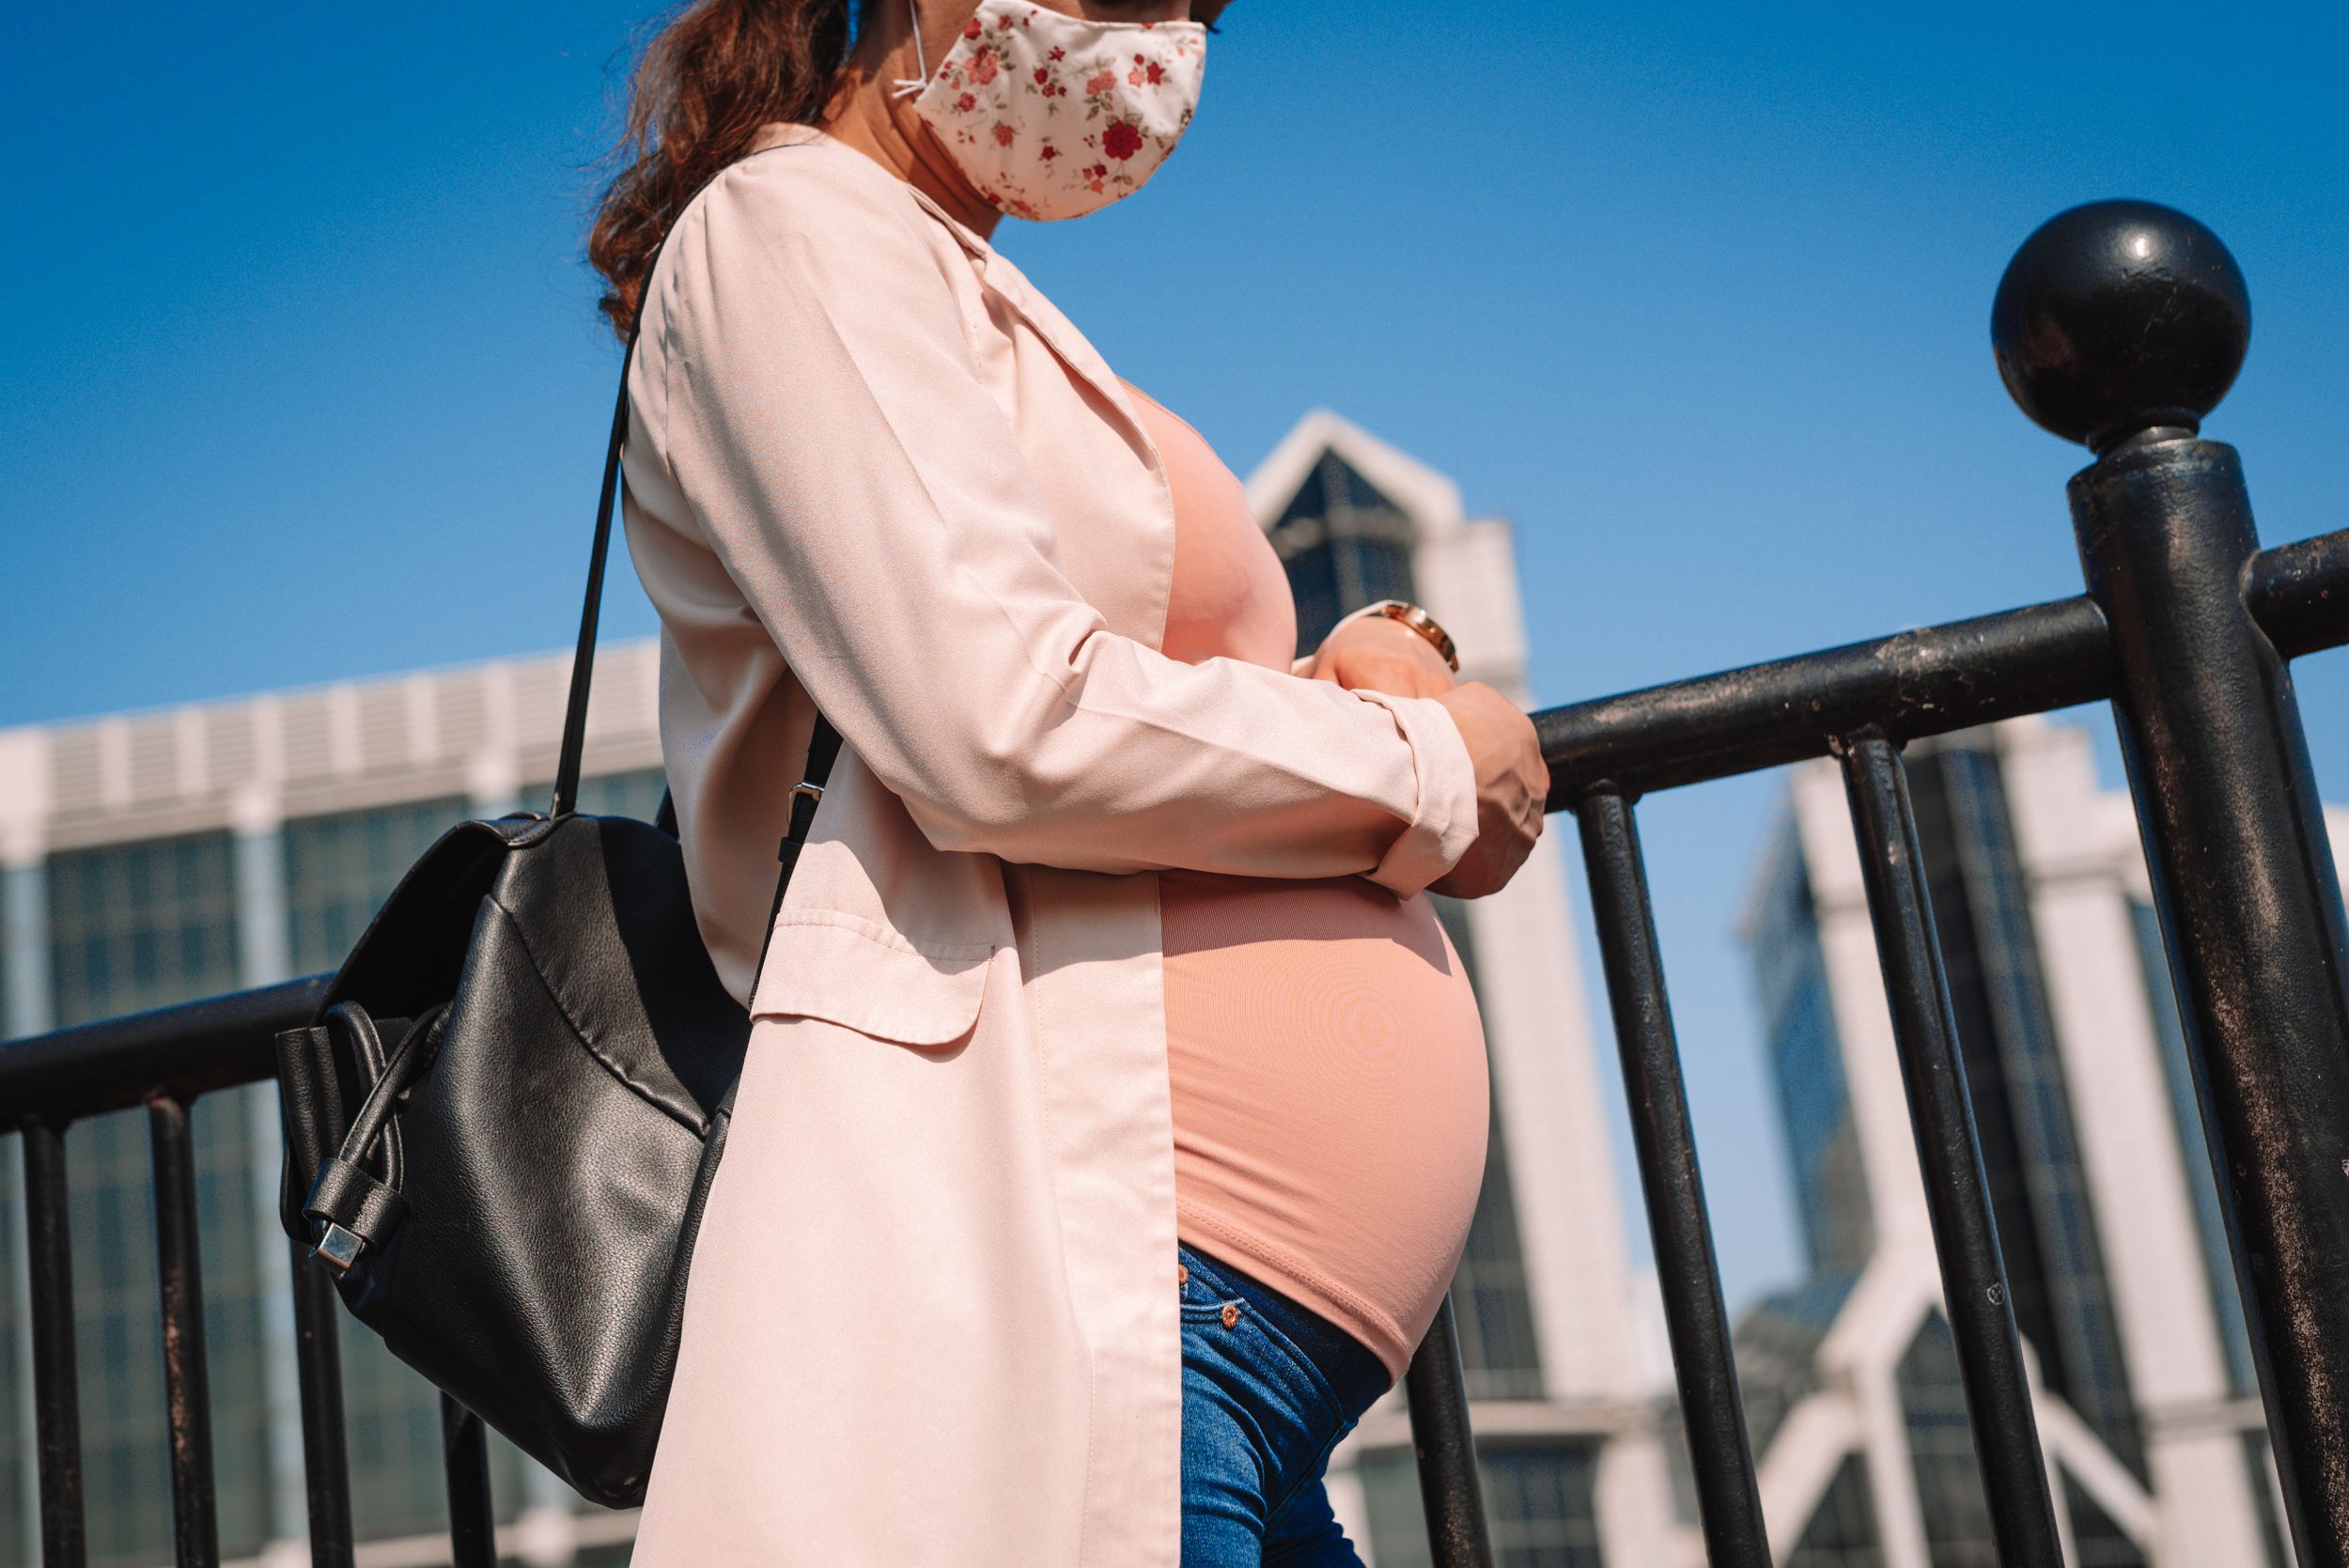 A pregnant woman walks down the street in London. Image by Corpii / Shutterstock. United Kingdom, undated.